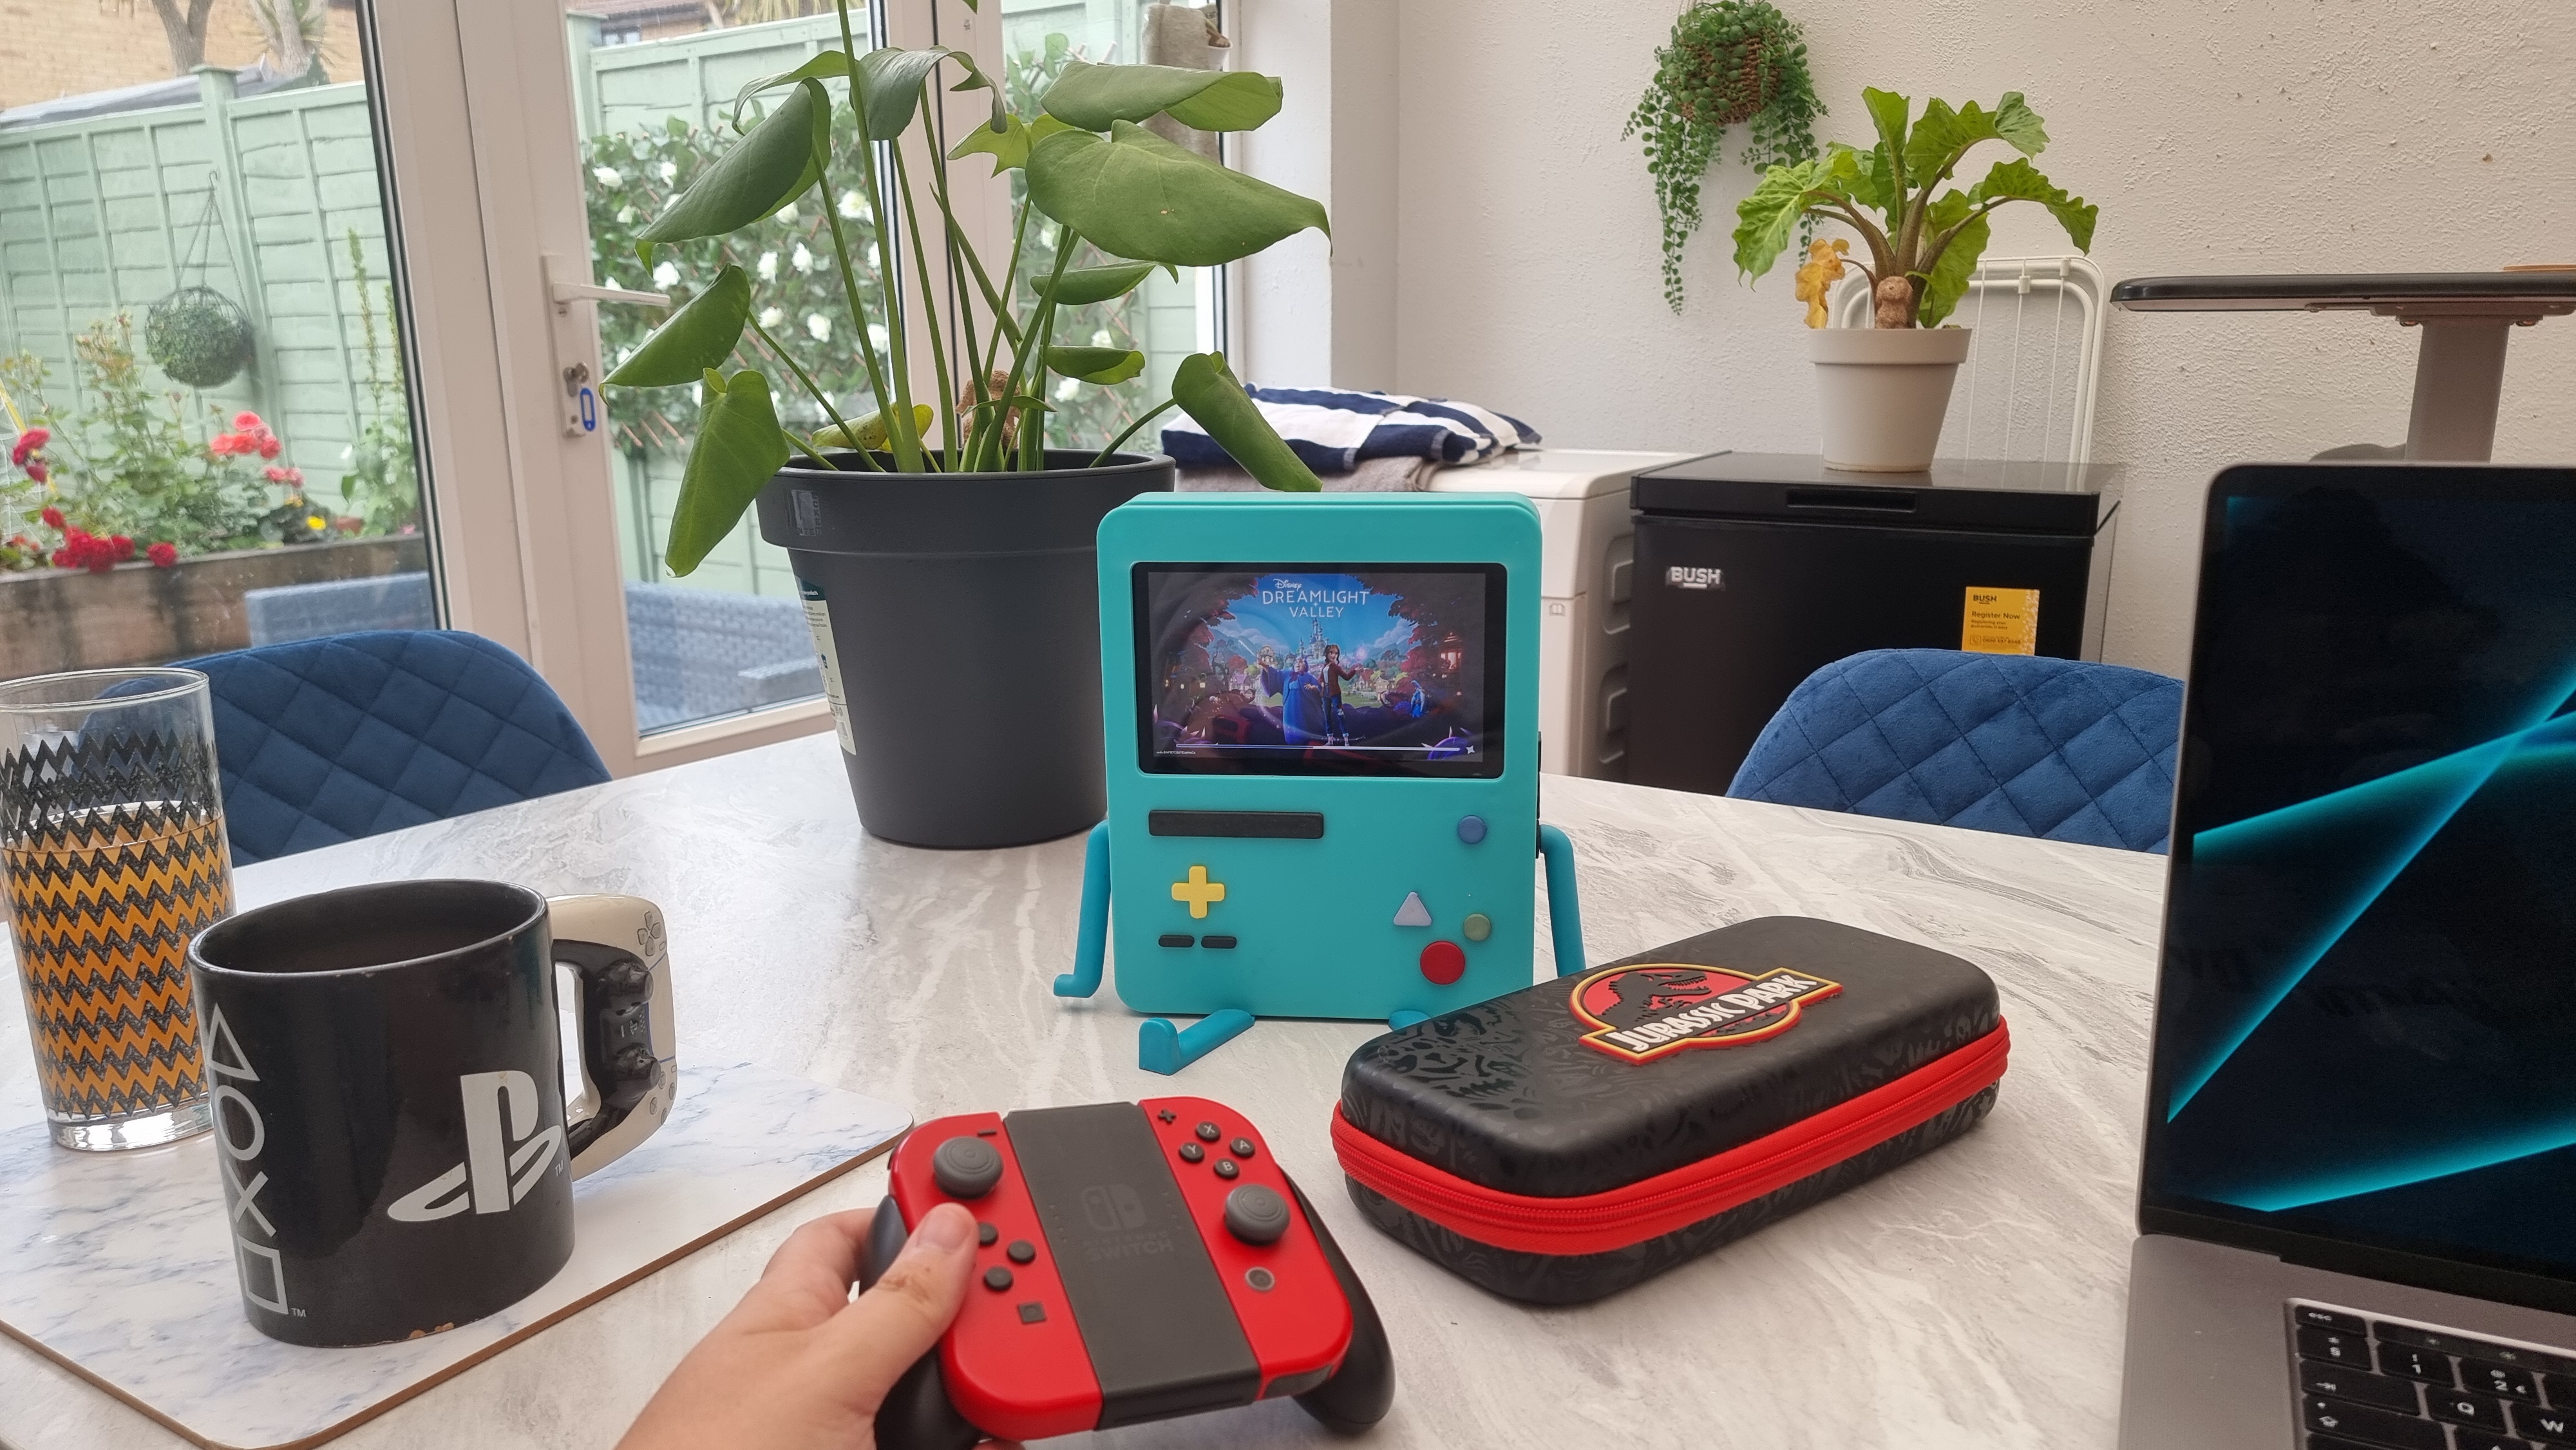 Back to school supplies; playing Disney Dreamlight Valley on Nintendo Switch with BMO dock